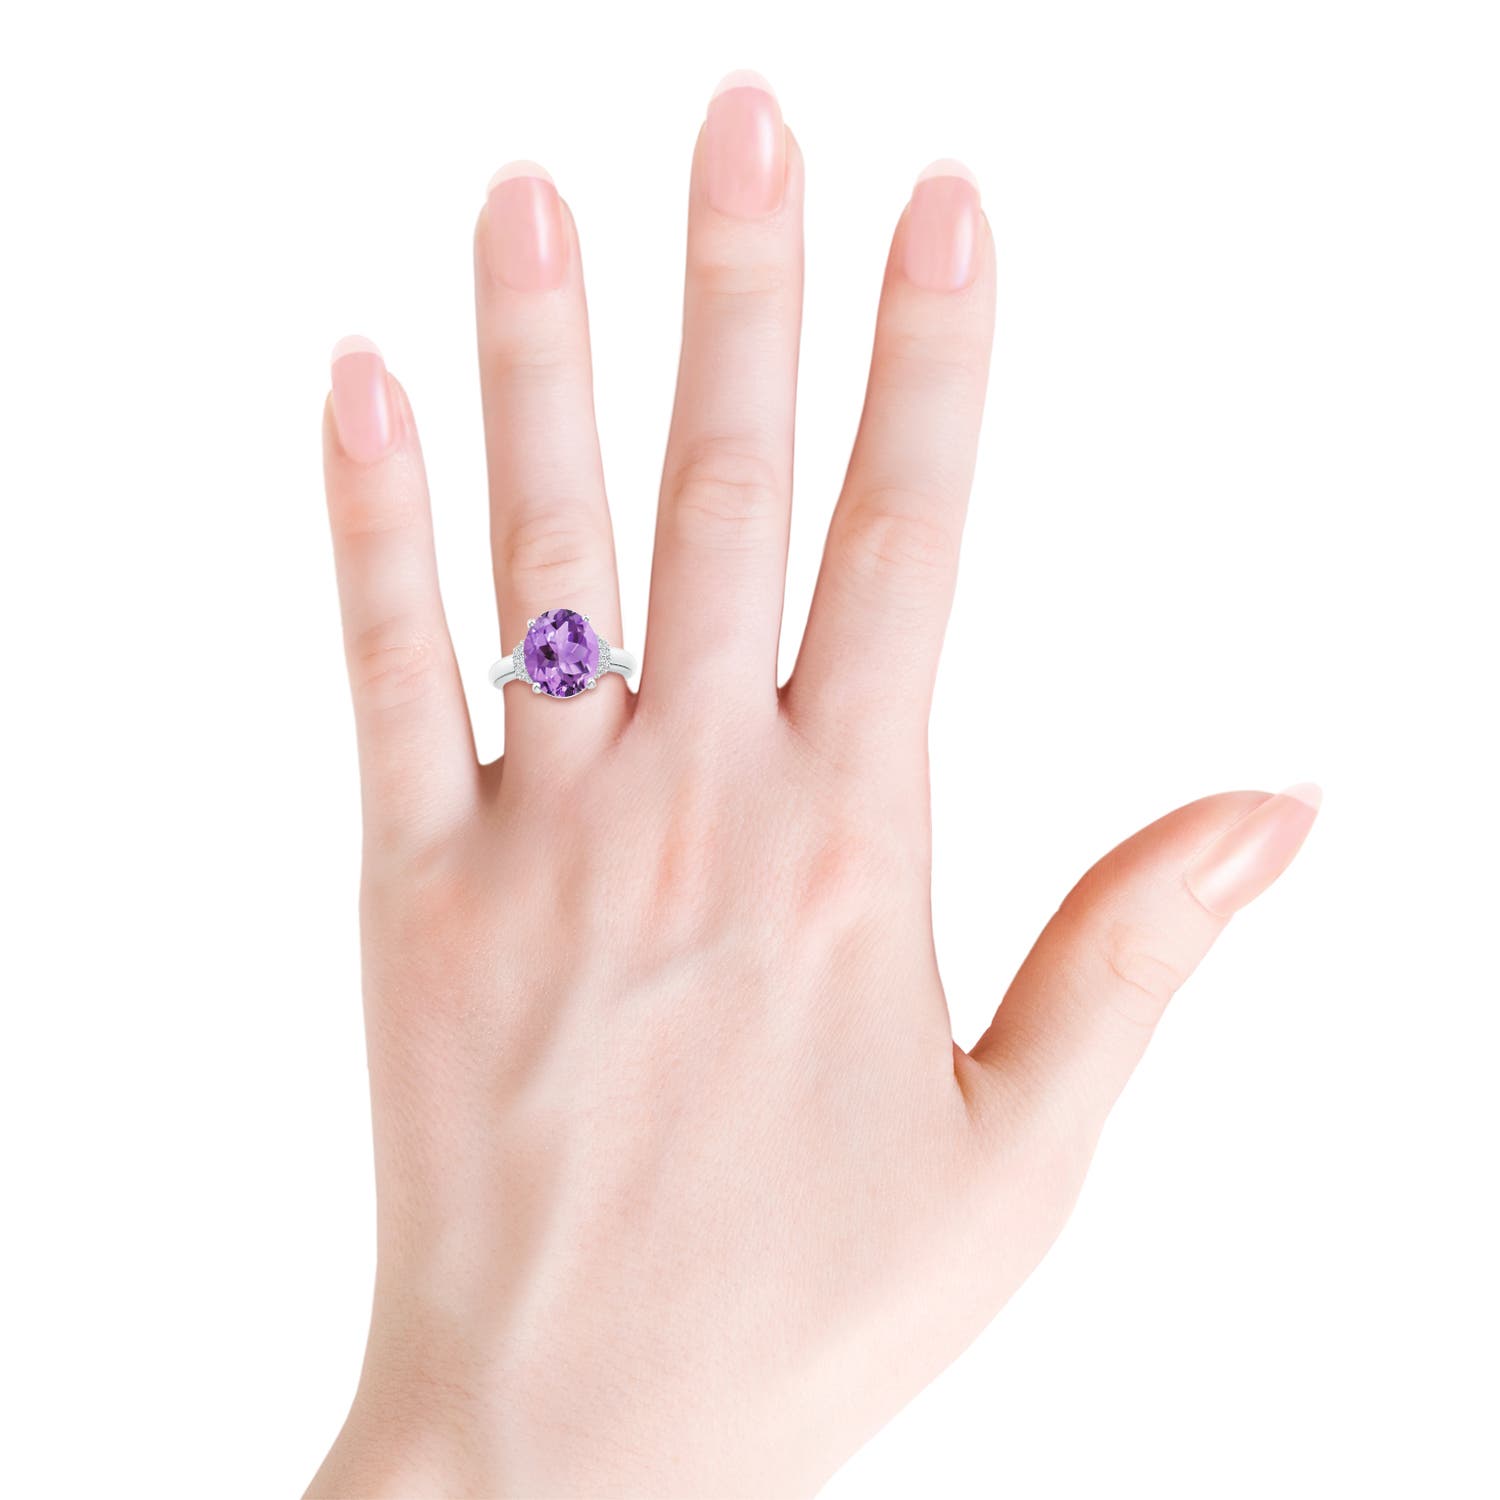 A - Amethyst / 4.54 CT / 14 KT White Gold